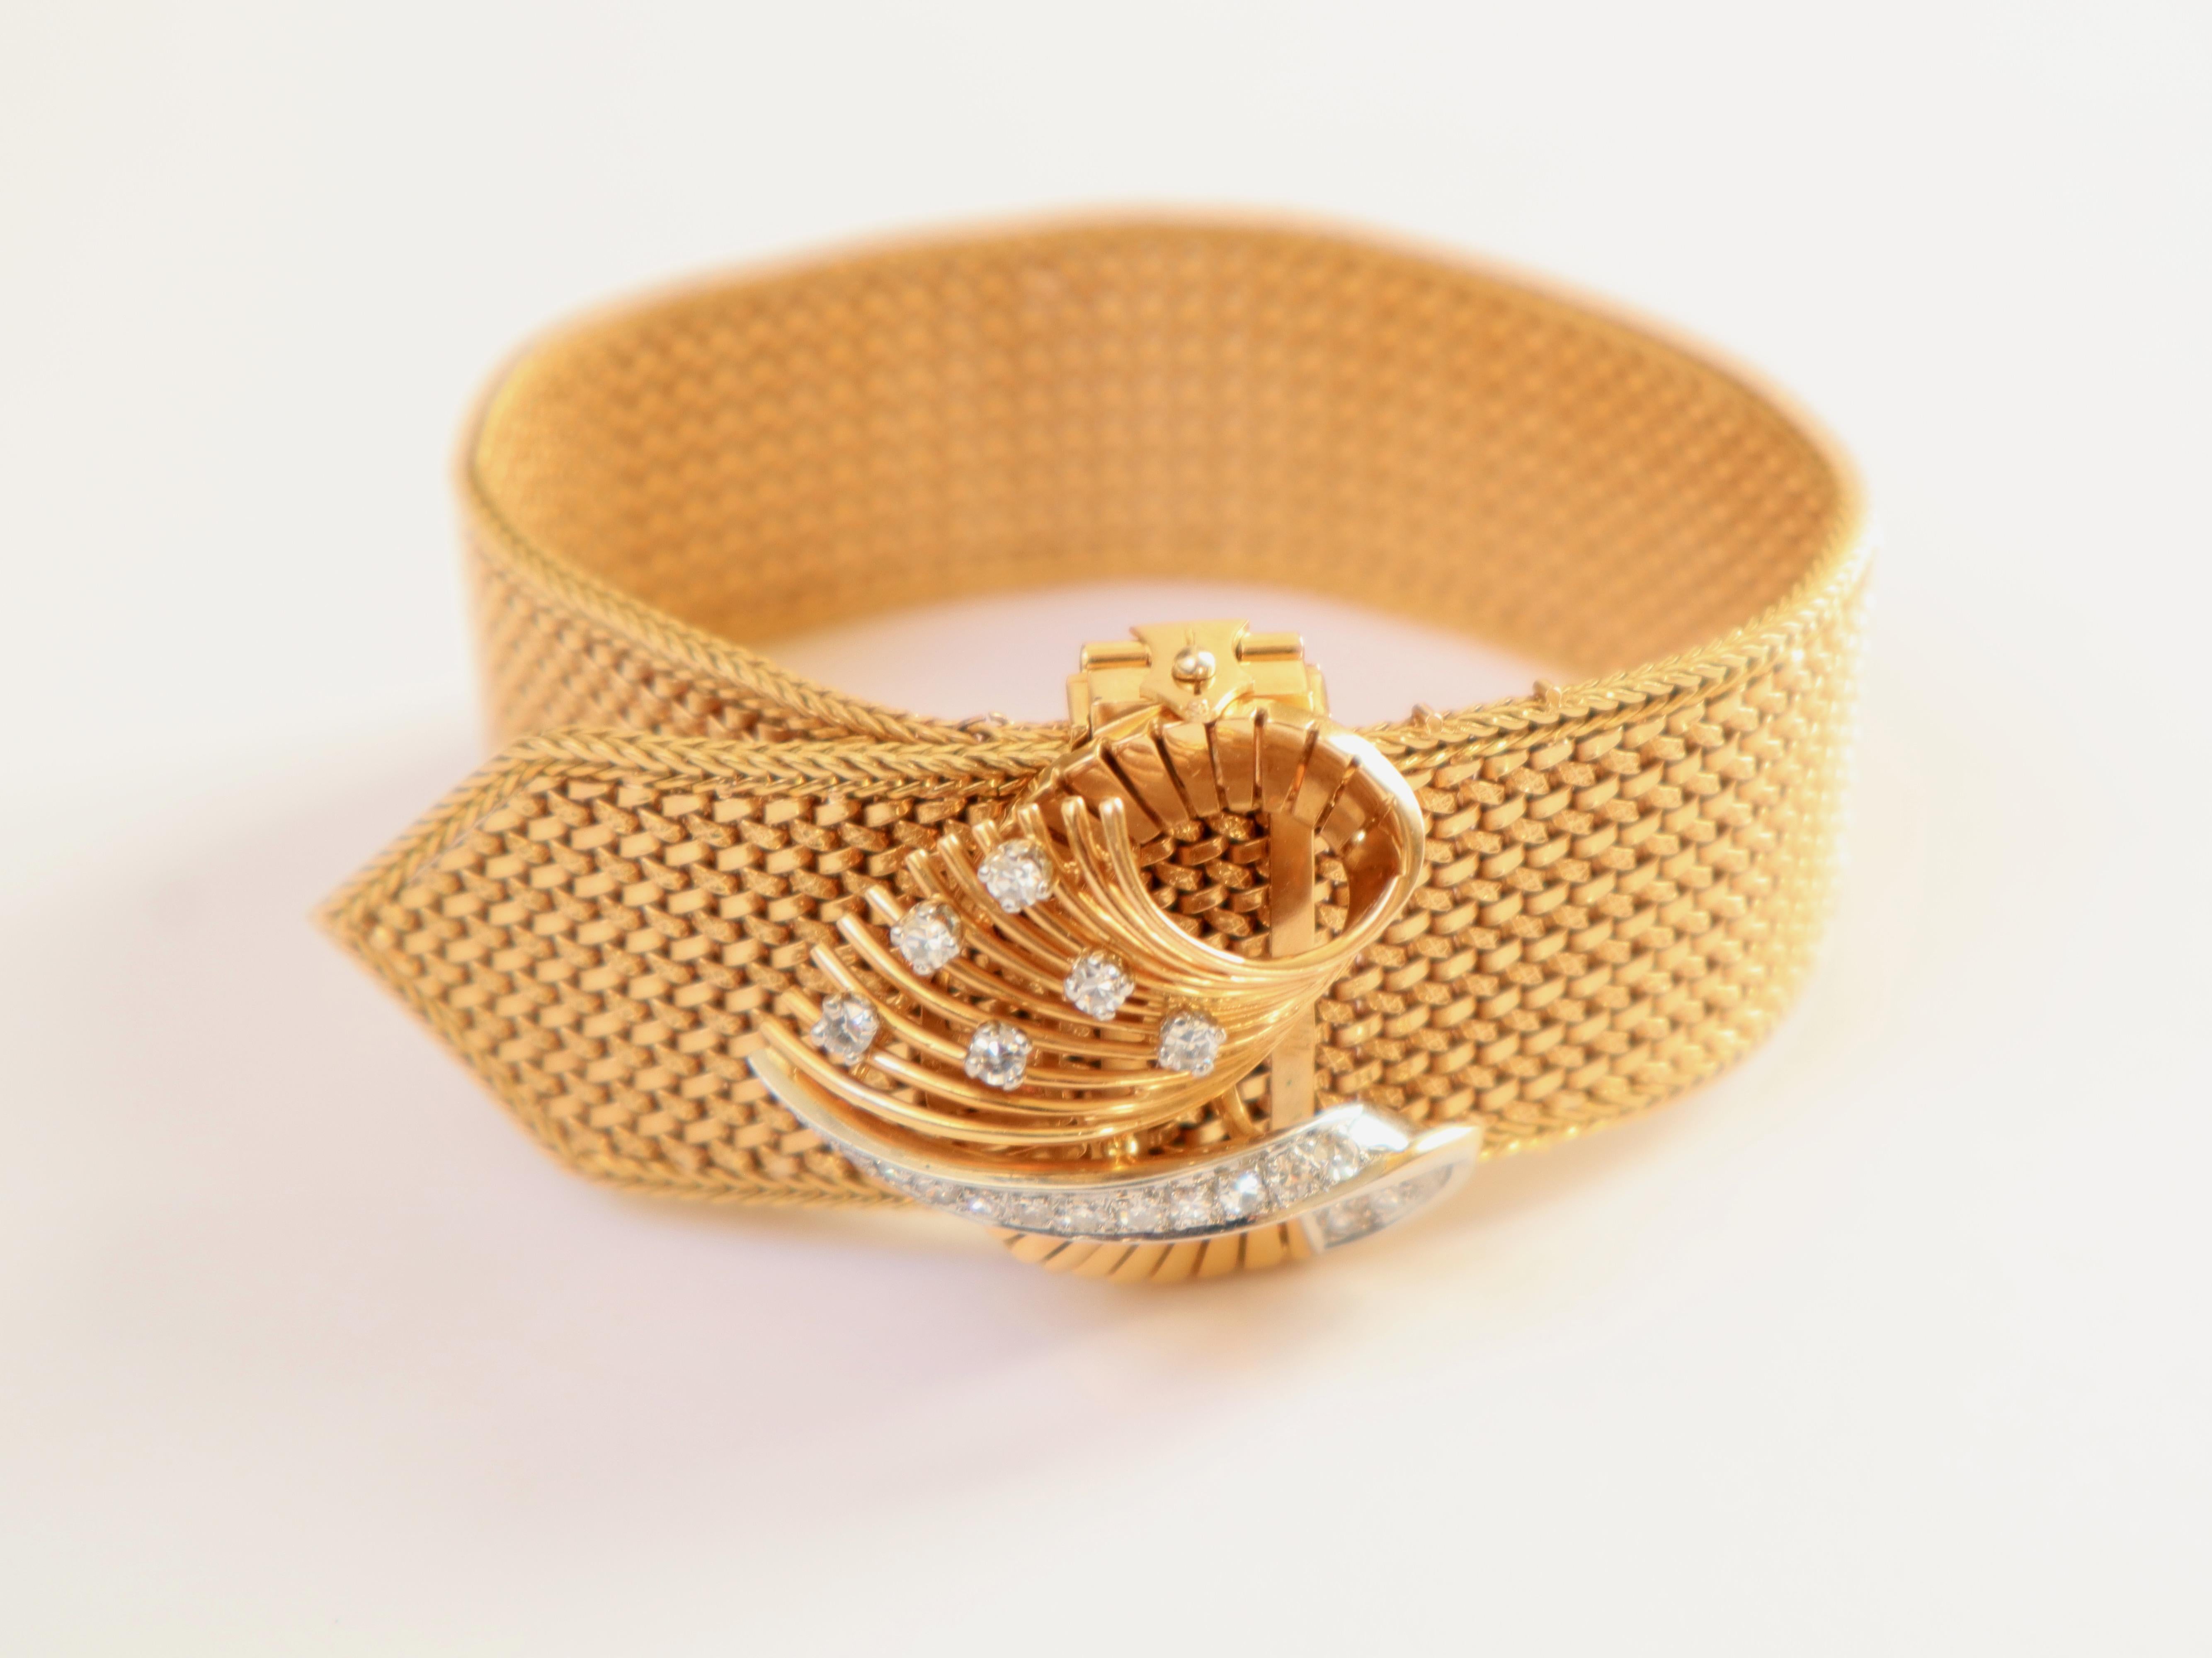 Ribbon bracelet Belt buckle made of a Polish mesh, clasp with scroll pattern highlighted with 8x8 cut diamonds. French work around 1950 in 18 carat yellow gold, platinum and diamonds.
Soft articulated knit with 3 adjustment notches to adjust the